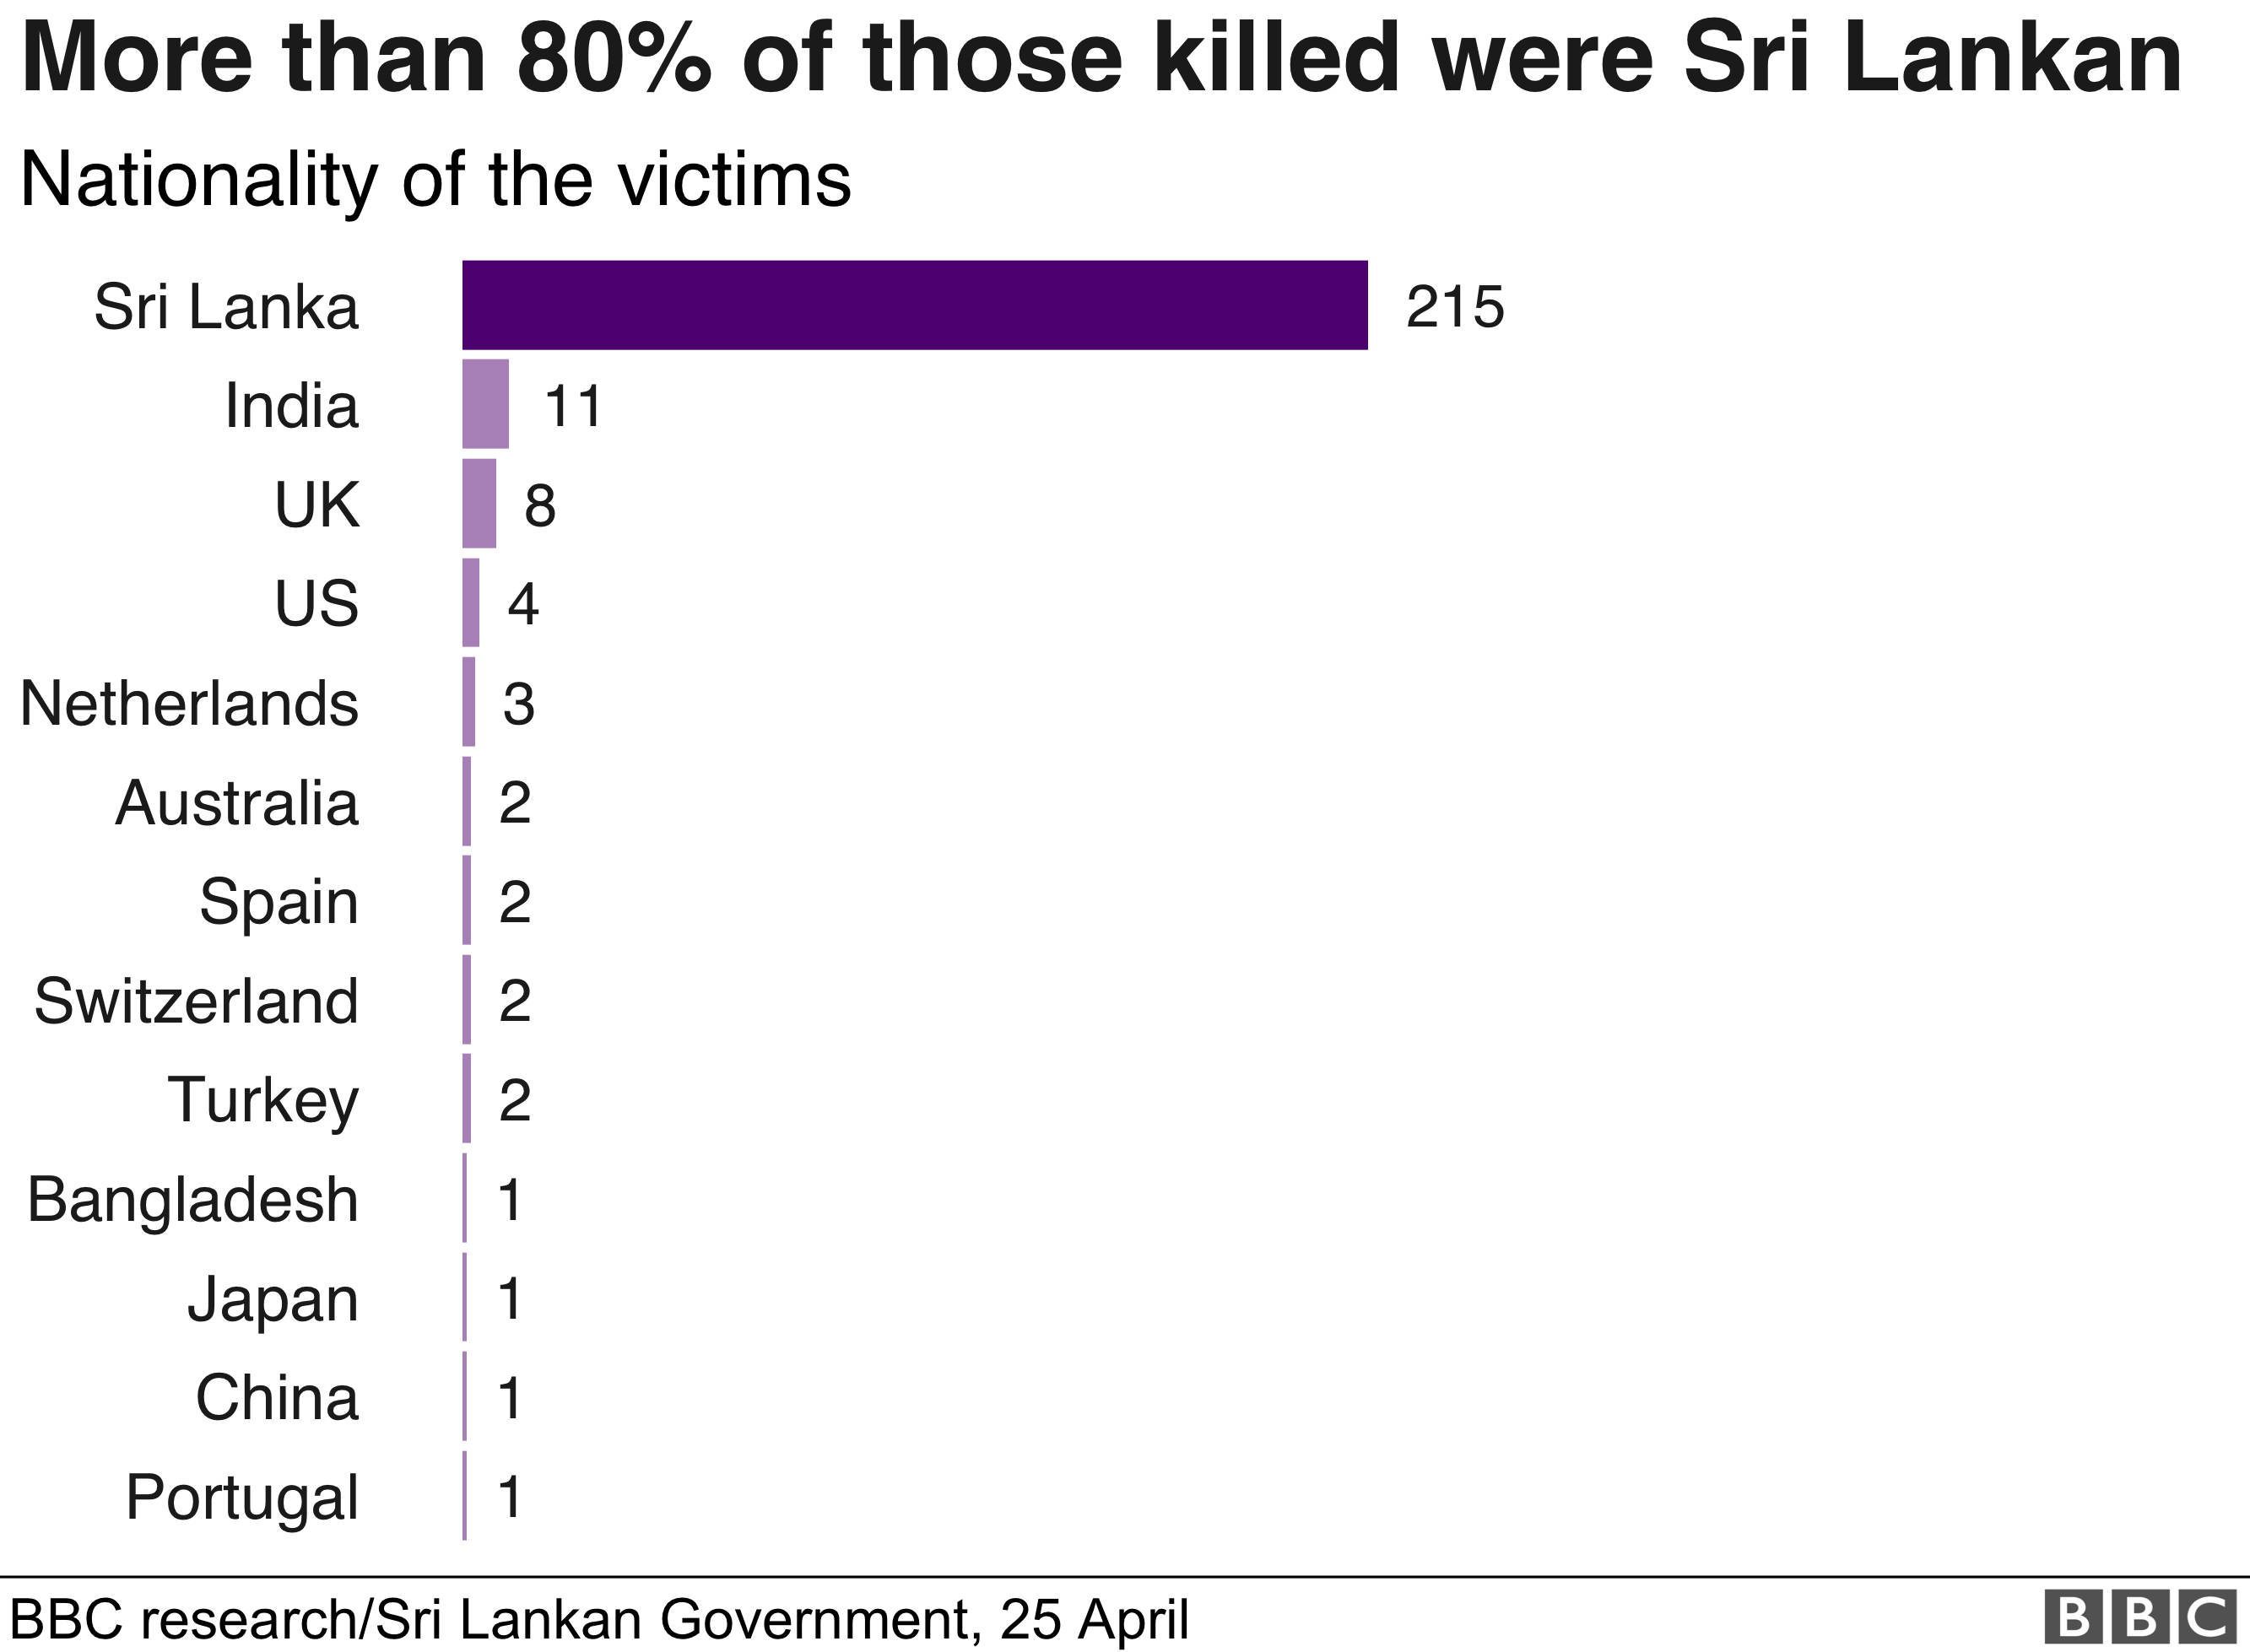 BBC graphic showing death toll from the Easter Sunday bomb attacks in Sri Lanka, 25 April 2019